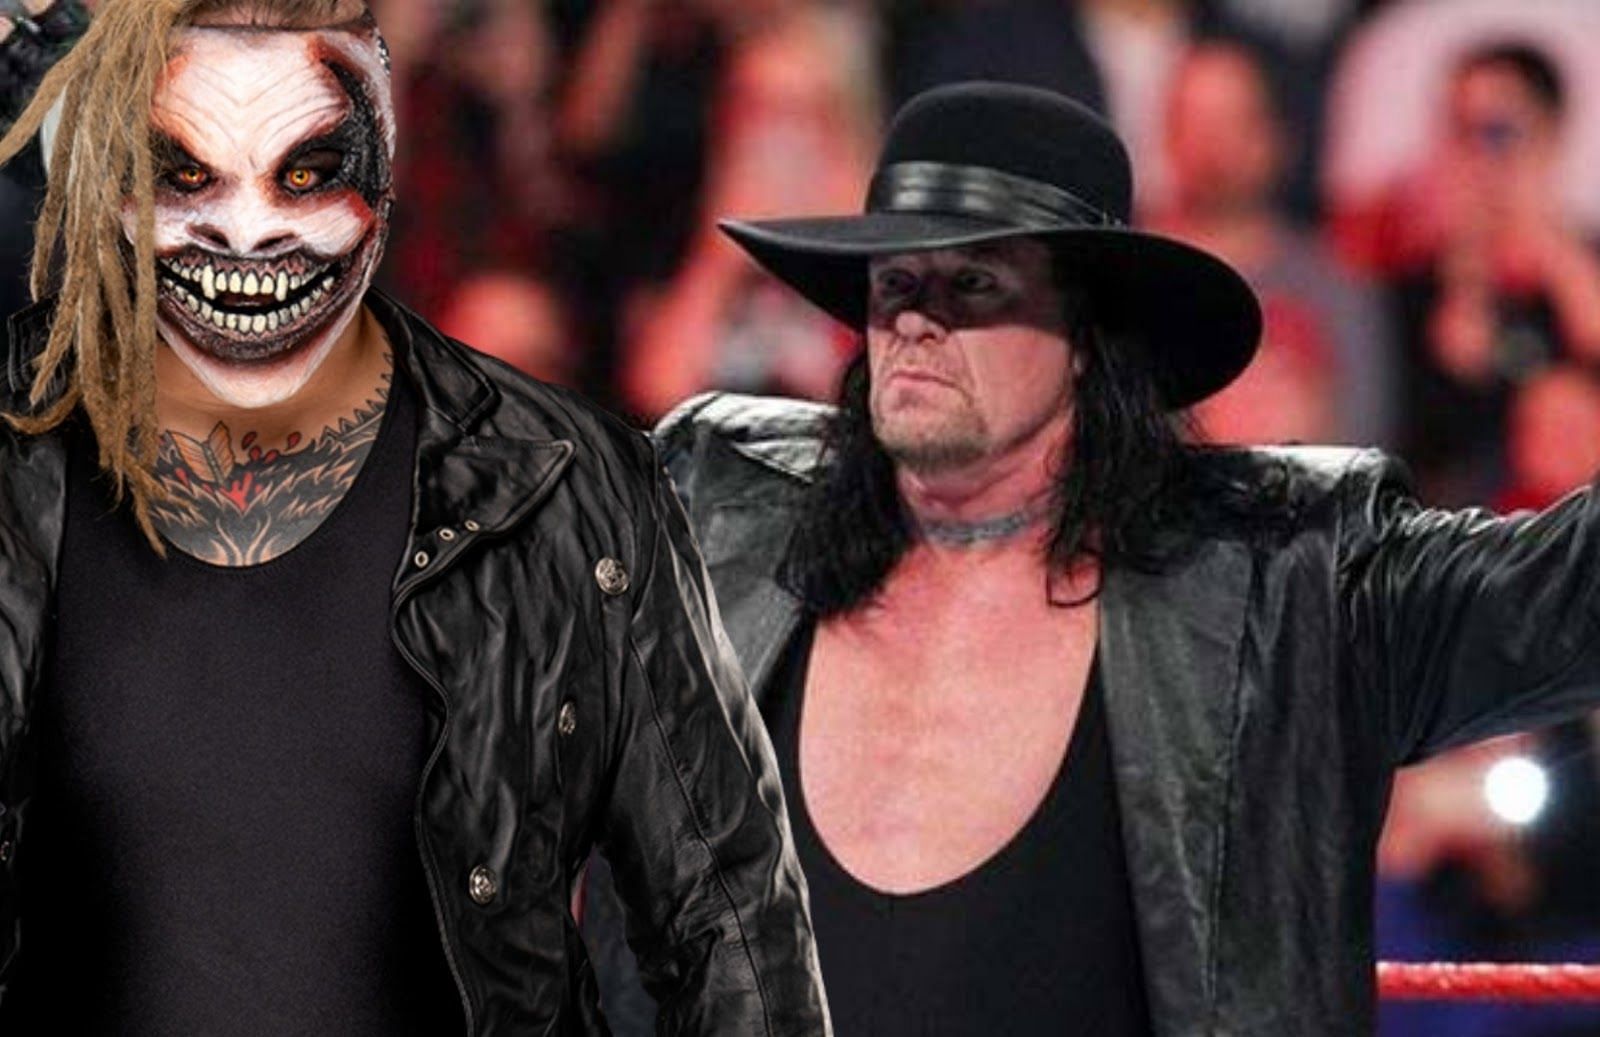 The Undertaker vs. The Fiend is one of the biggest dream matches.